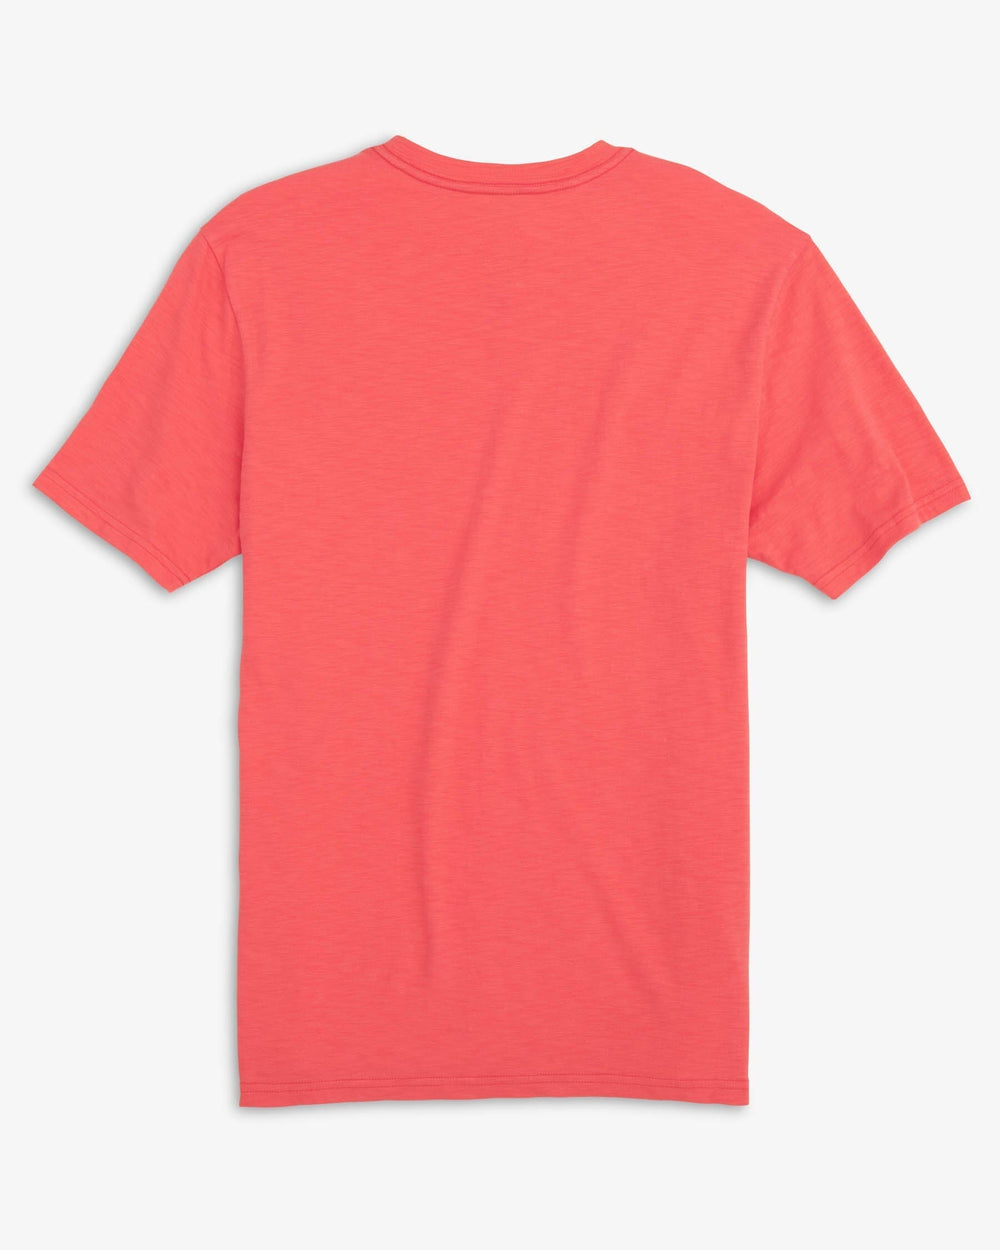 The back view of the Southern Tide Sun Farer Short Sleeve T-Shirt by Southern Tide - Sunkist Coral